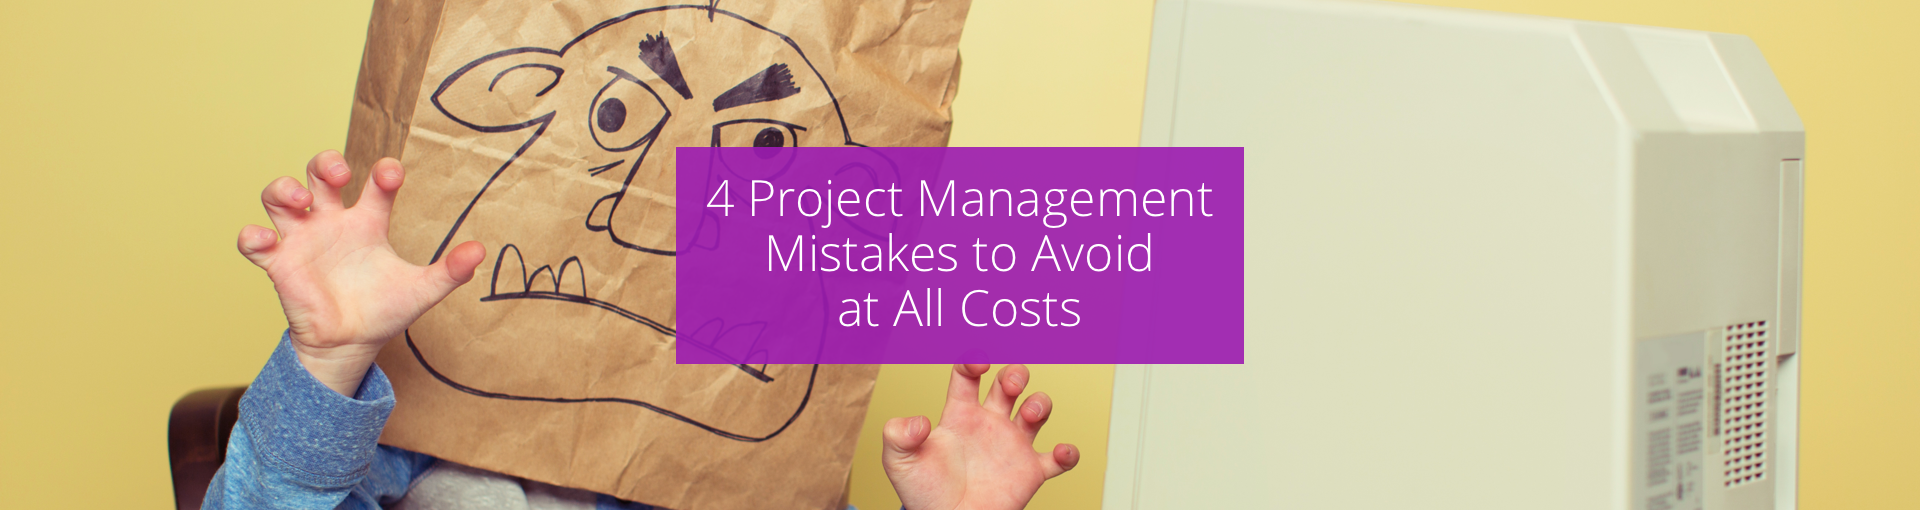 4 Project Management Mistakes to Avoid at All Costs Featured Image